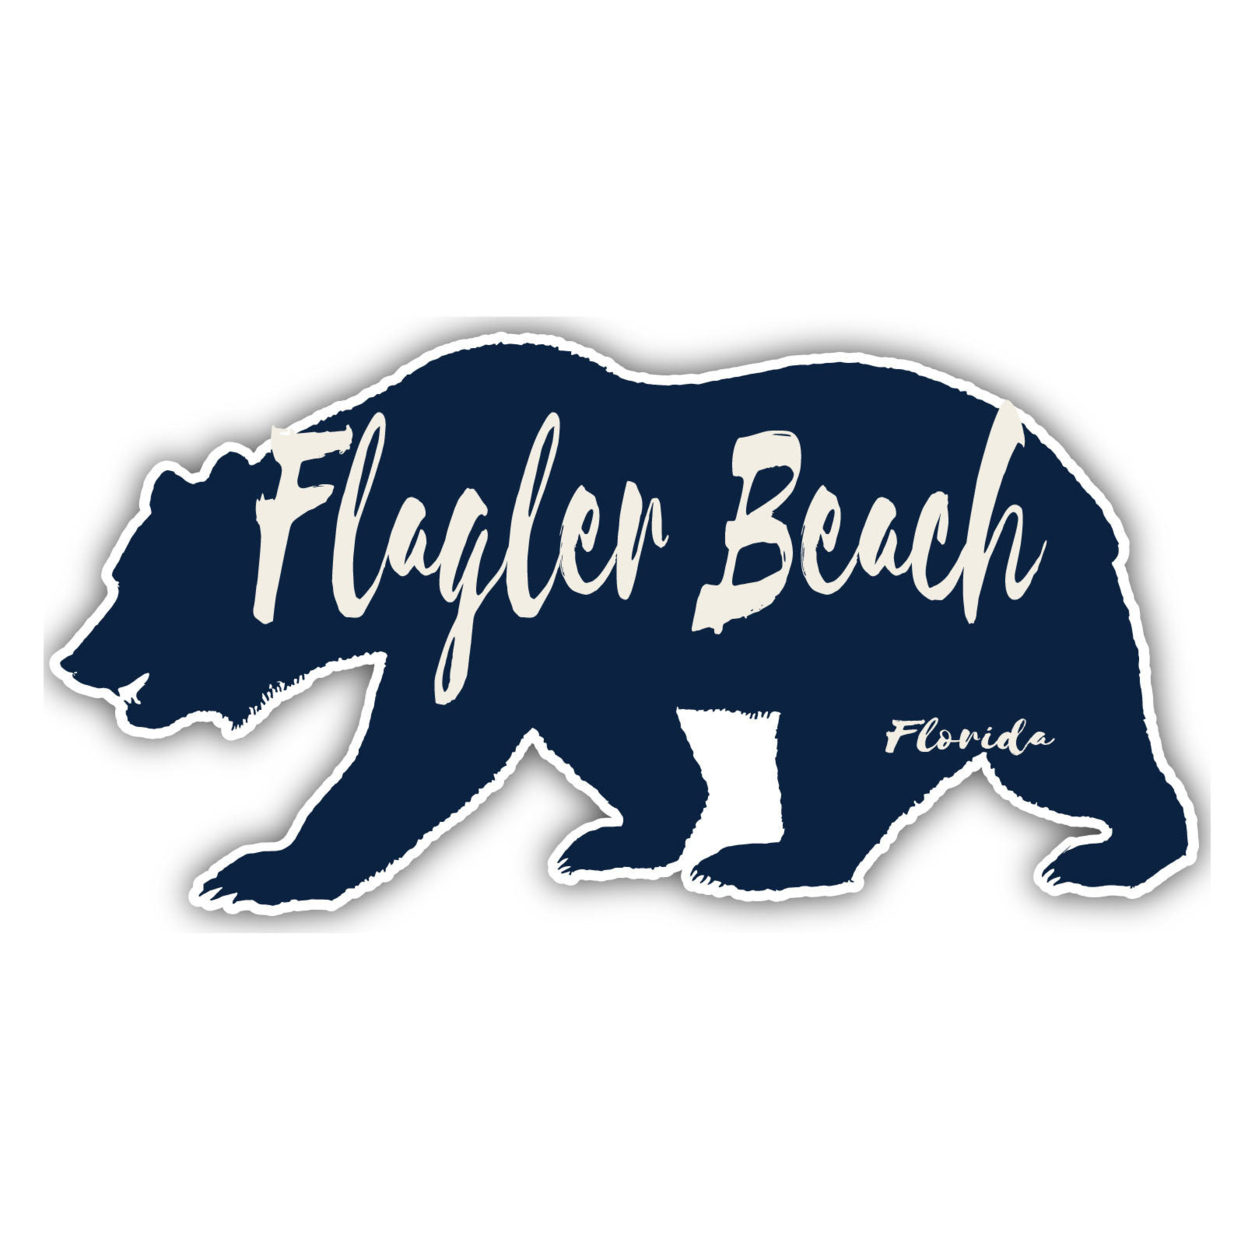 Flagler Beach Florida Souvenir Decorative Stickers (Choose Theme And Size) - 4-Pack, 10-Inch, Camp Life